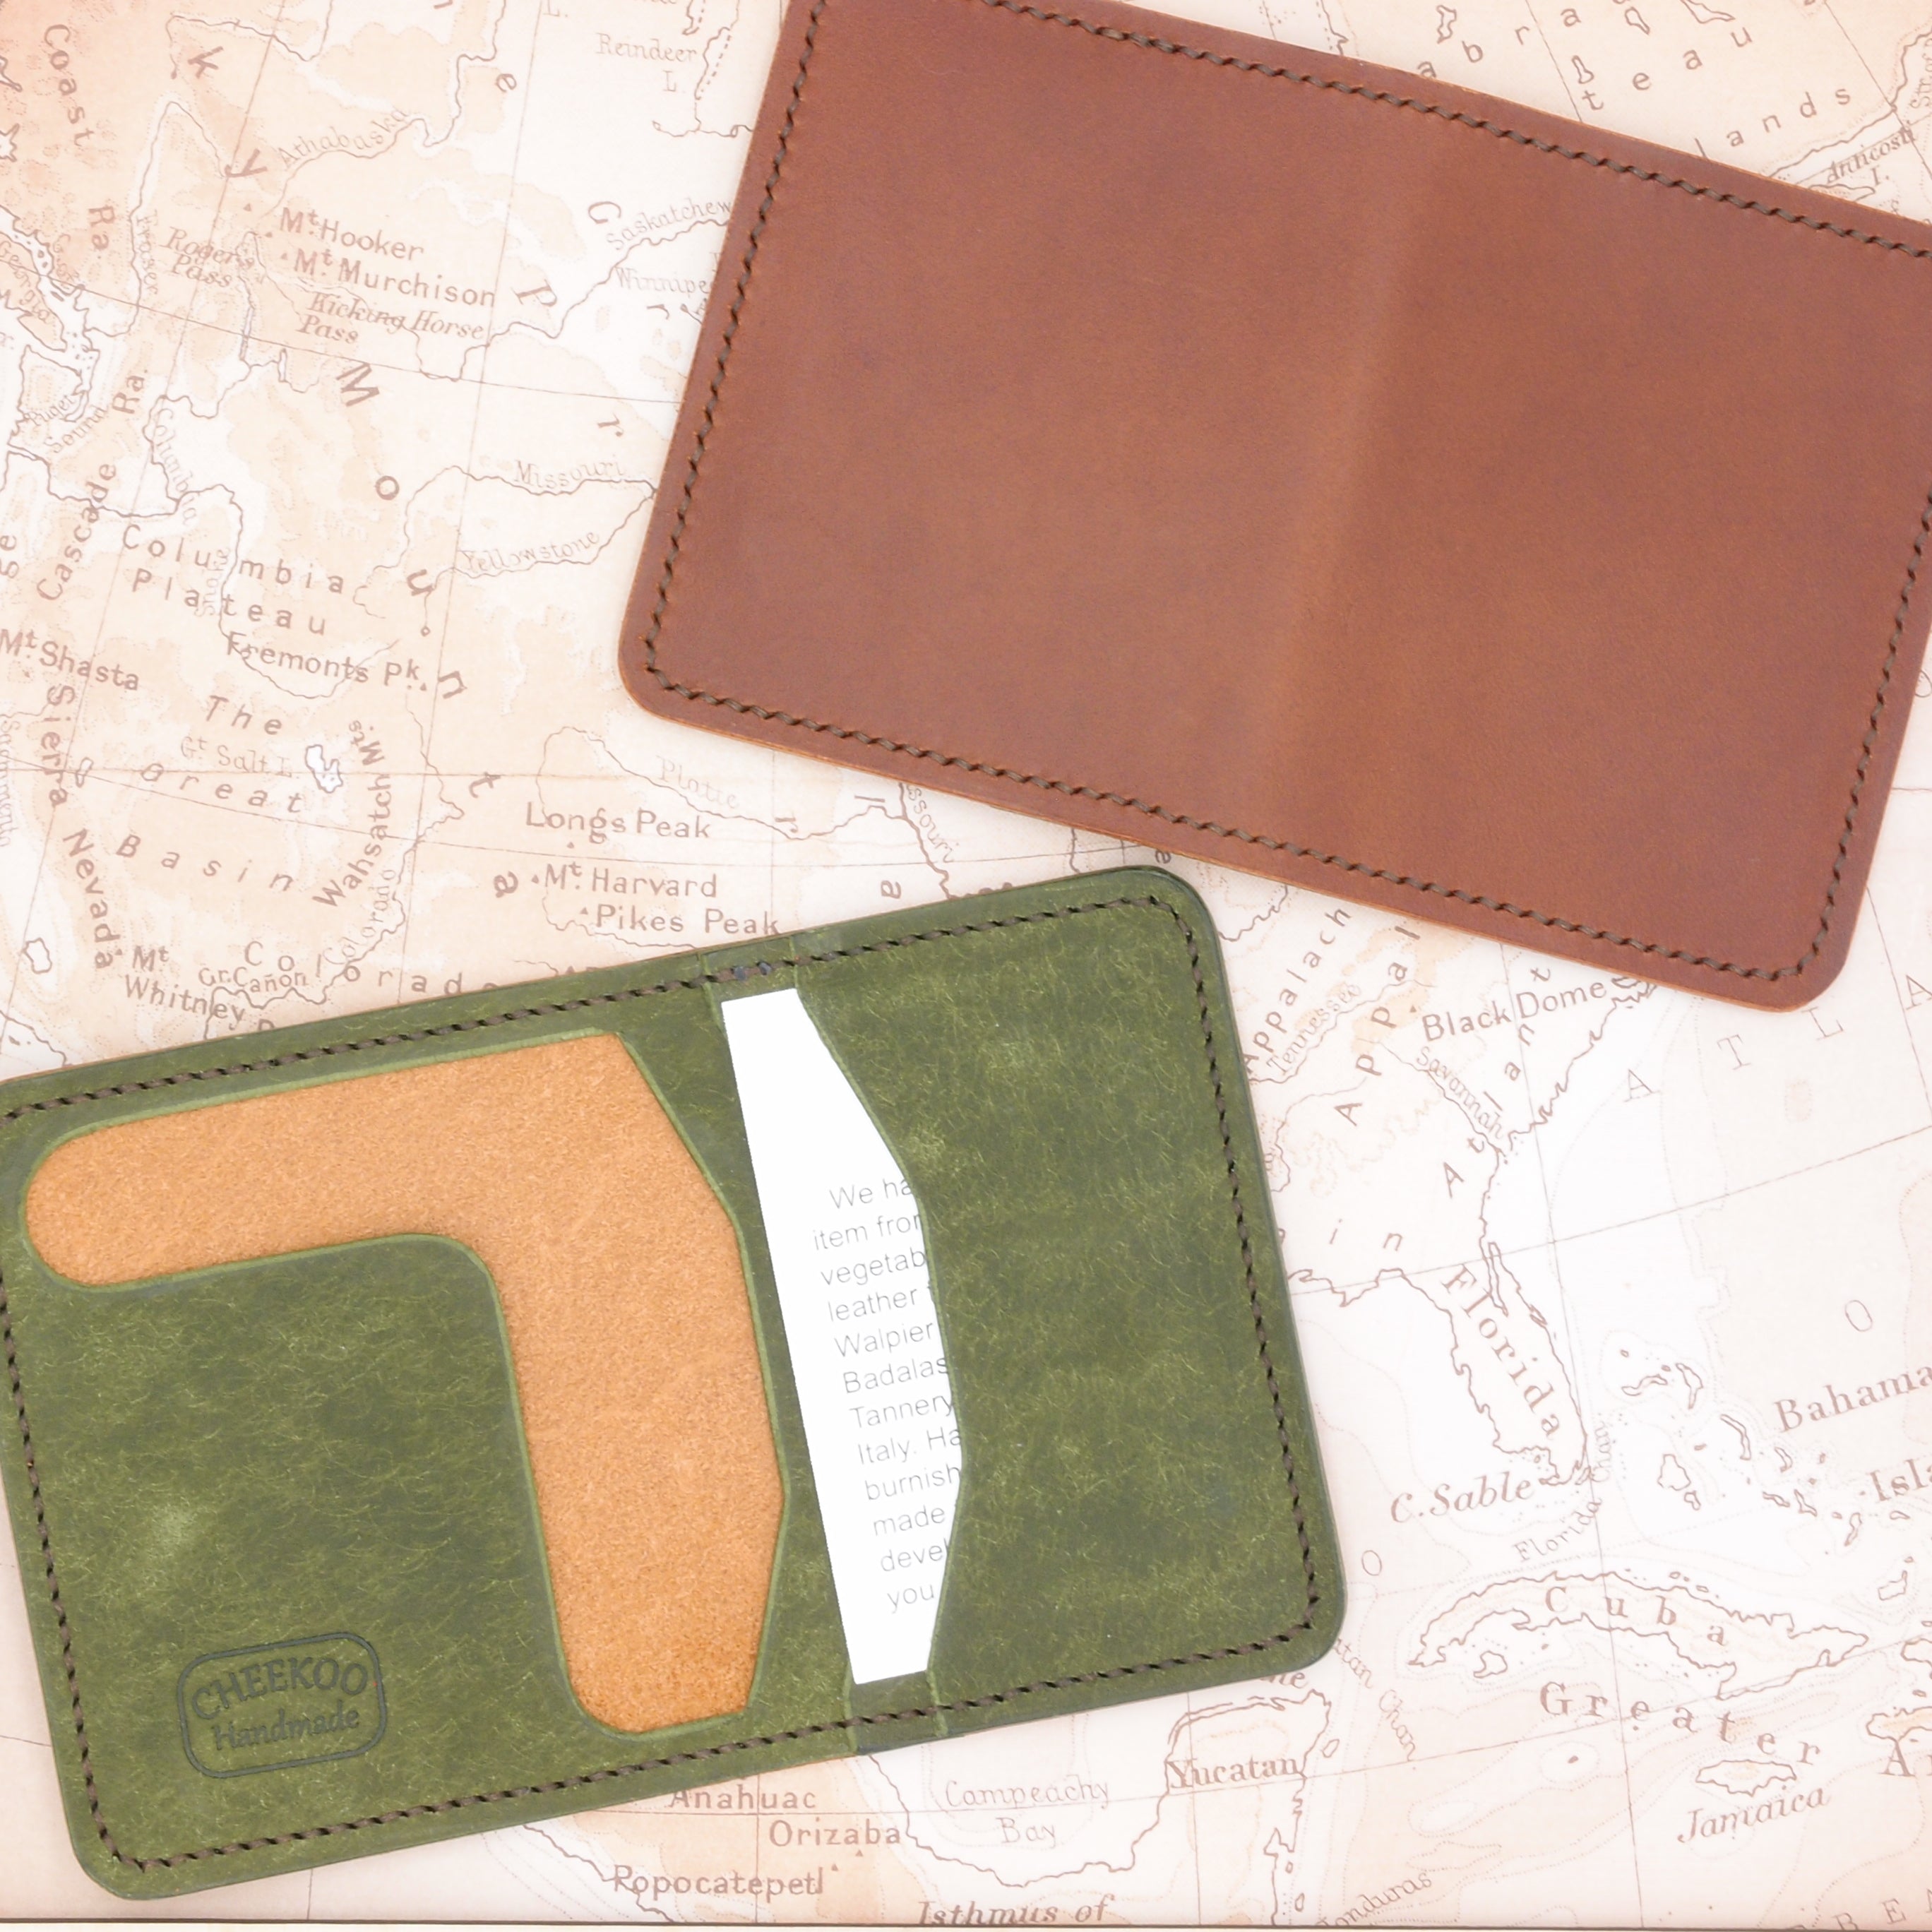 Two wallets in mahogany or green colors made of full grain vegetable tanned leather